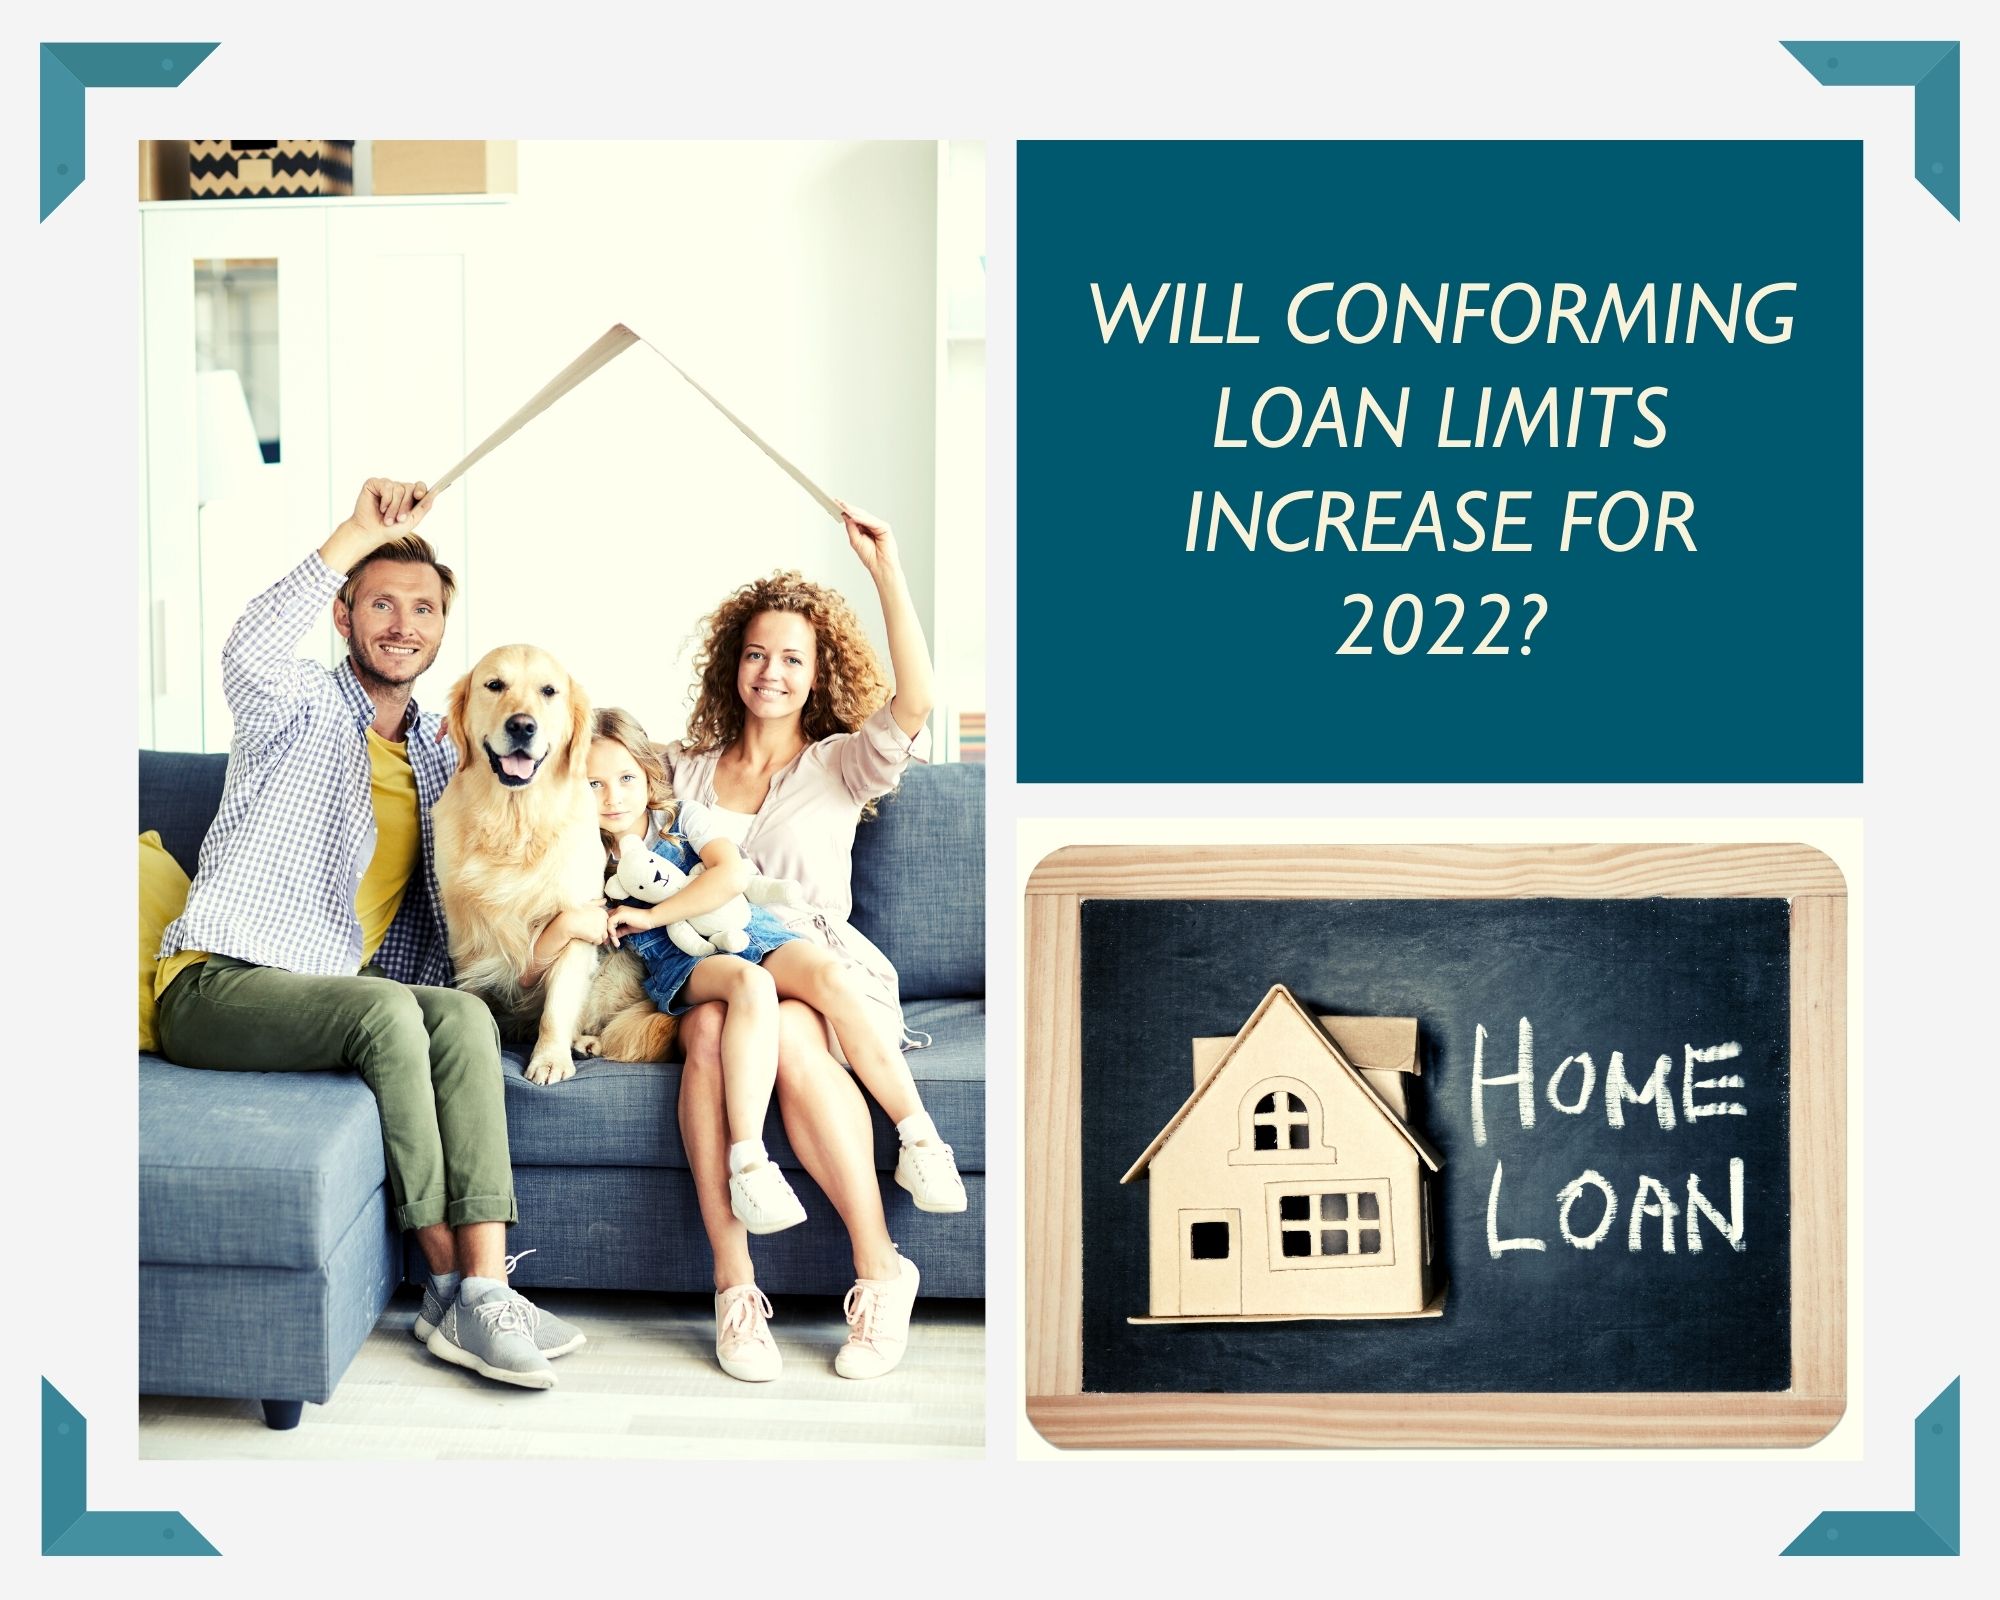 Home Loan photo and family photo